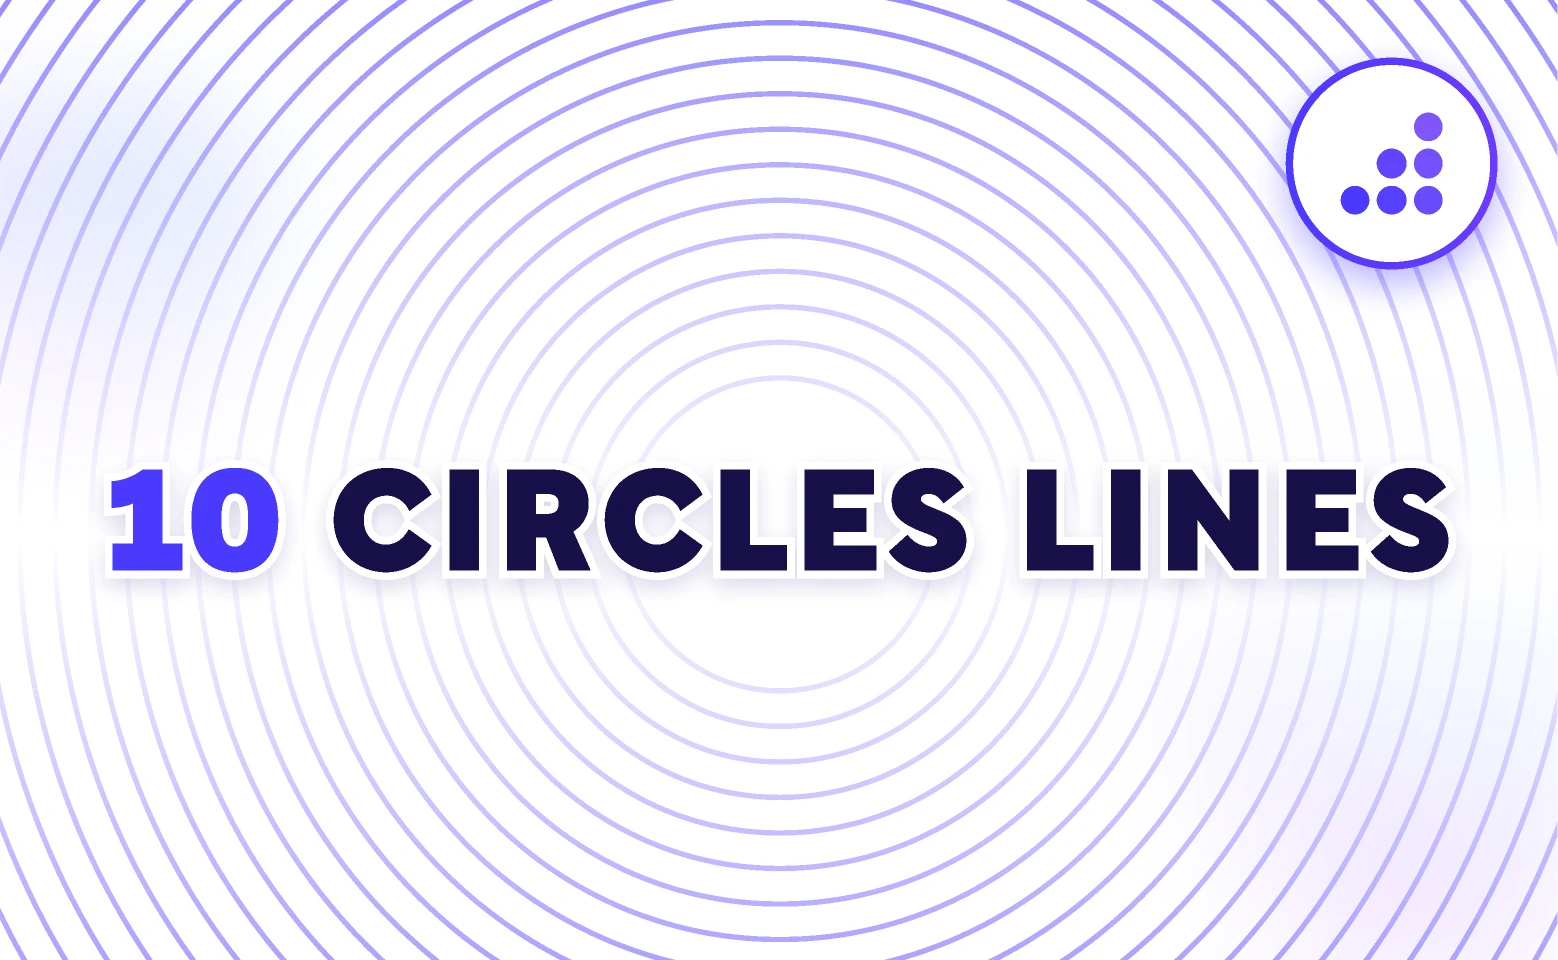 10 Circle Lines | BRIX Templates for Figma and Adobe XD